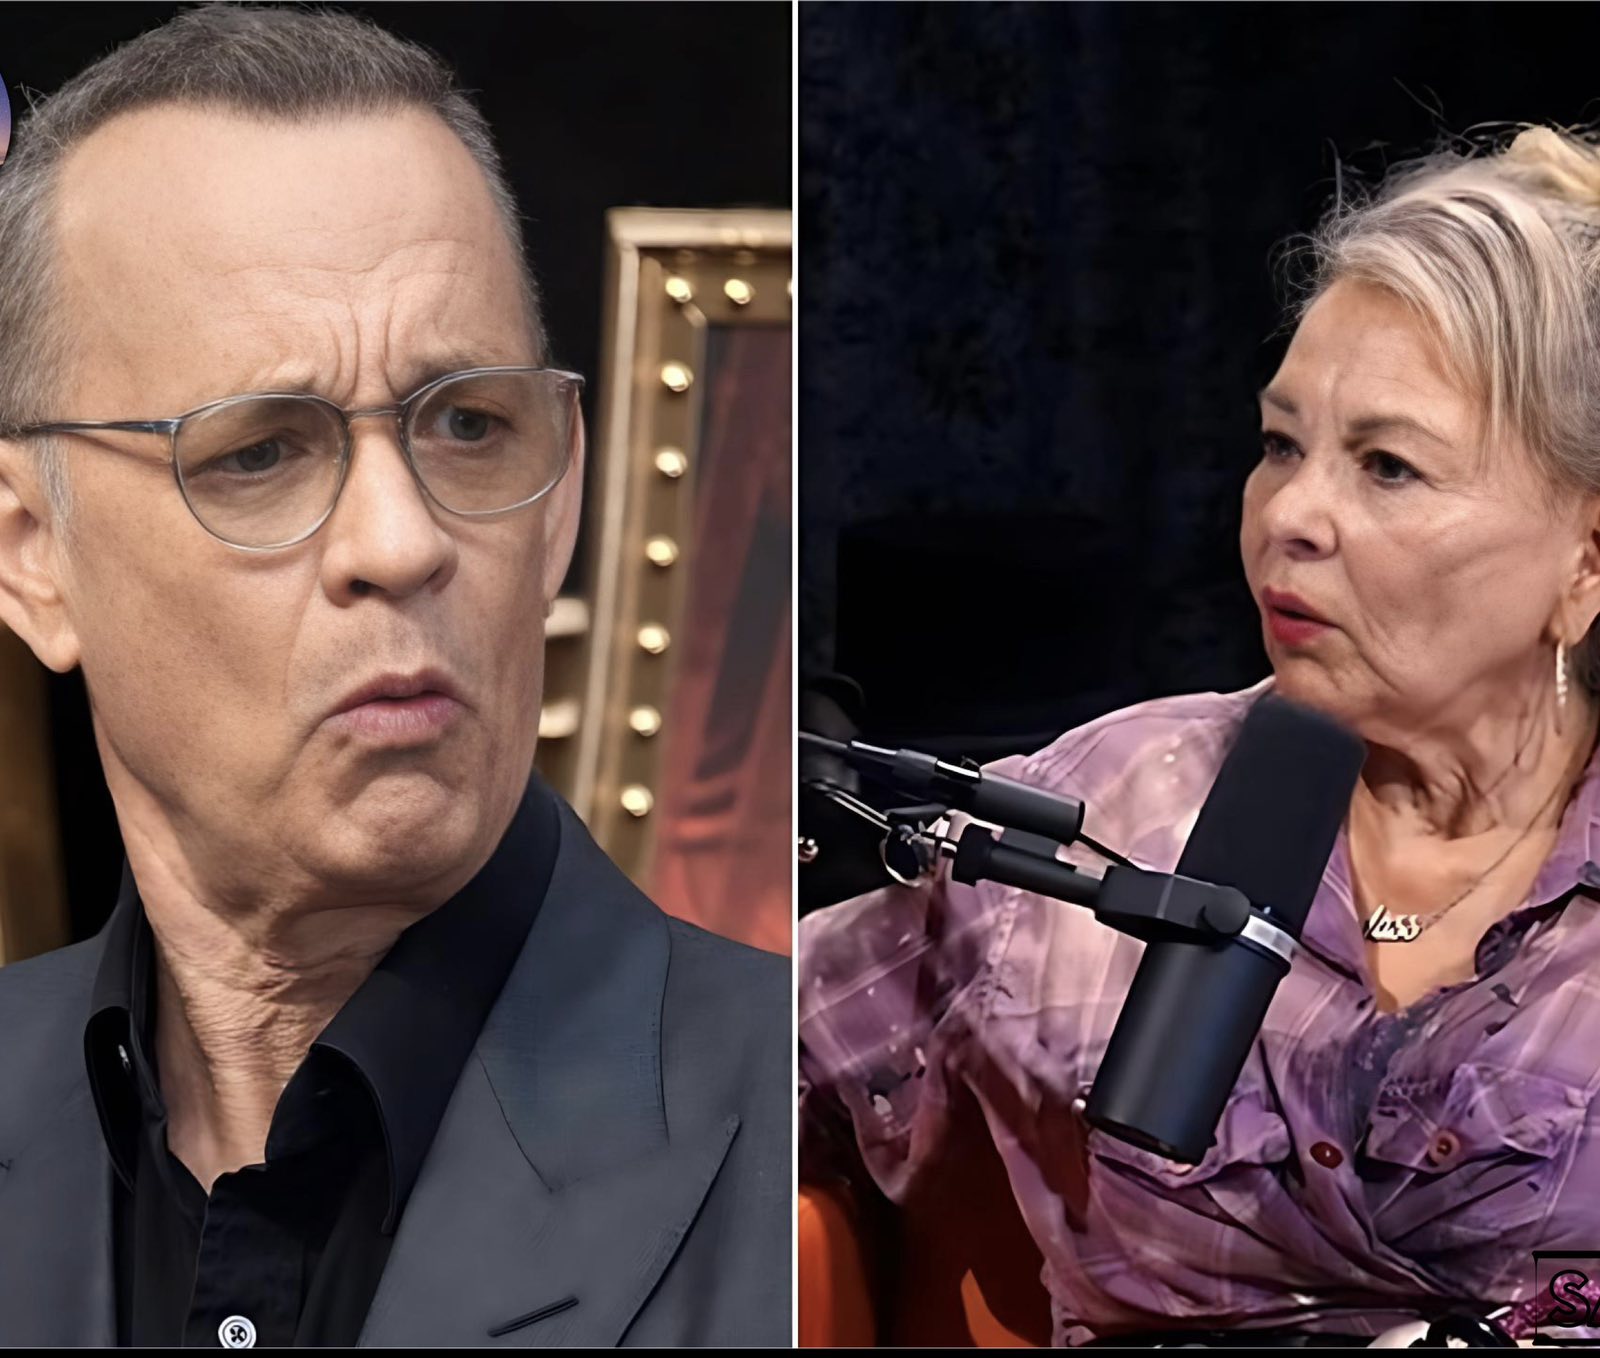 “Roseanne Barr Shocks Industry by Removing Tom Hanks from New Show”